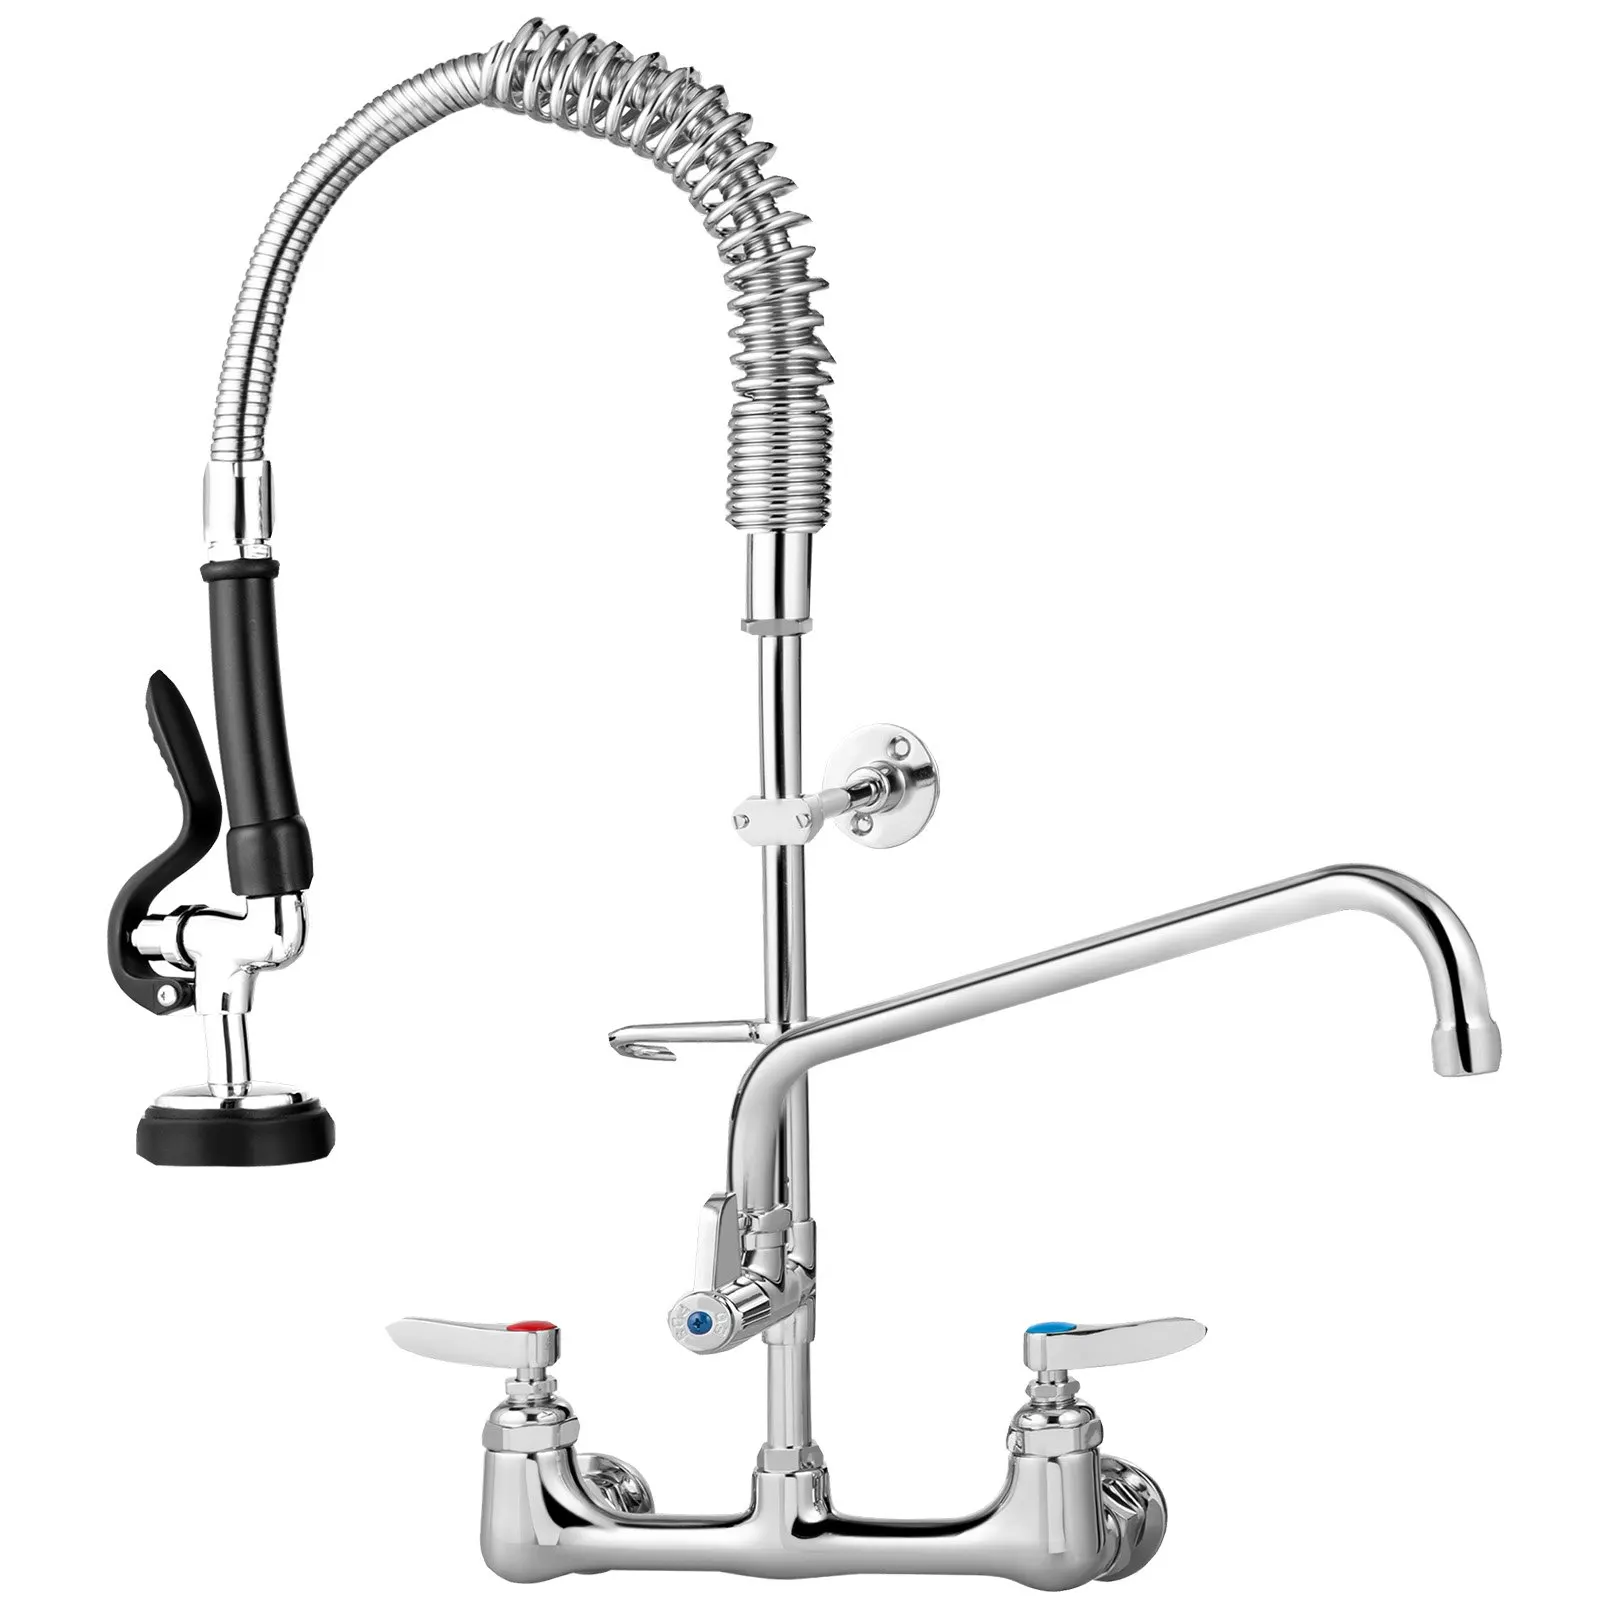 

Eco Friendly Sink Faucet with Pre-Rinse Sprayer And Add-on Swing Pot Filler Faucet,8 Inch Center Commercial Kitchen Sink Faucet